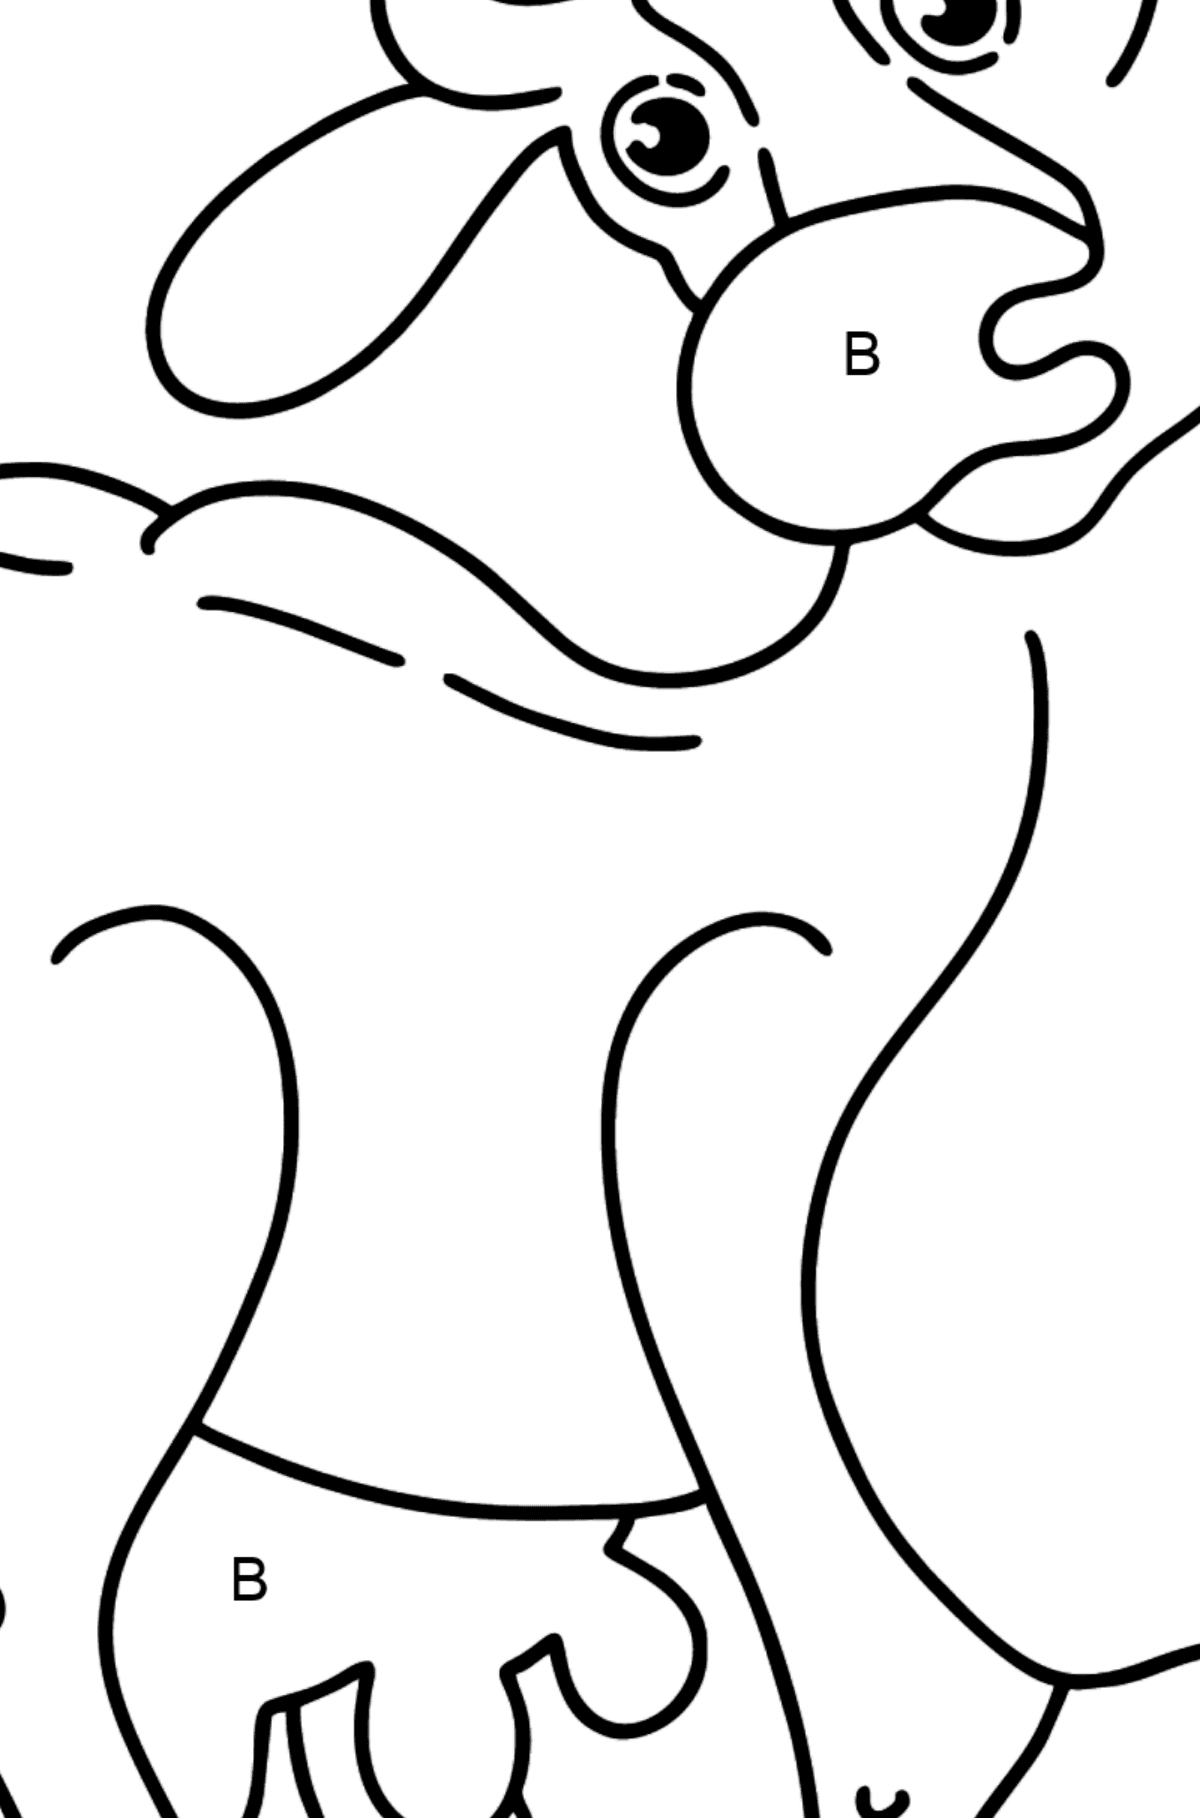 Cow coloring page - Coloring by Letters for Kids